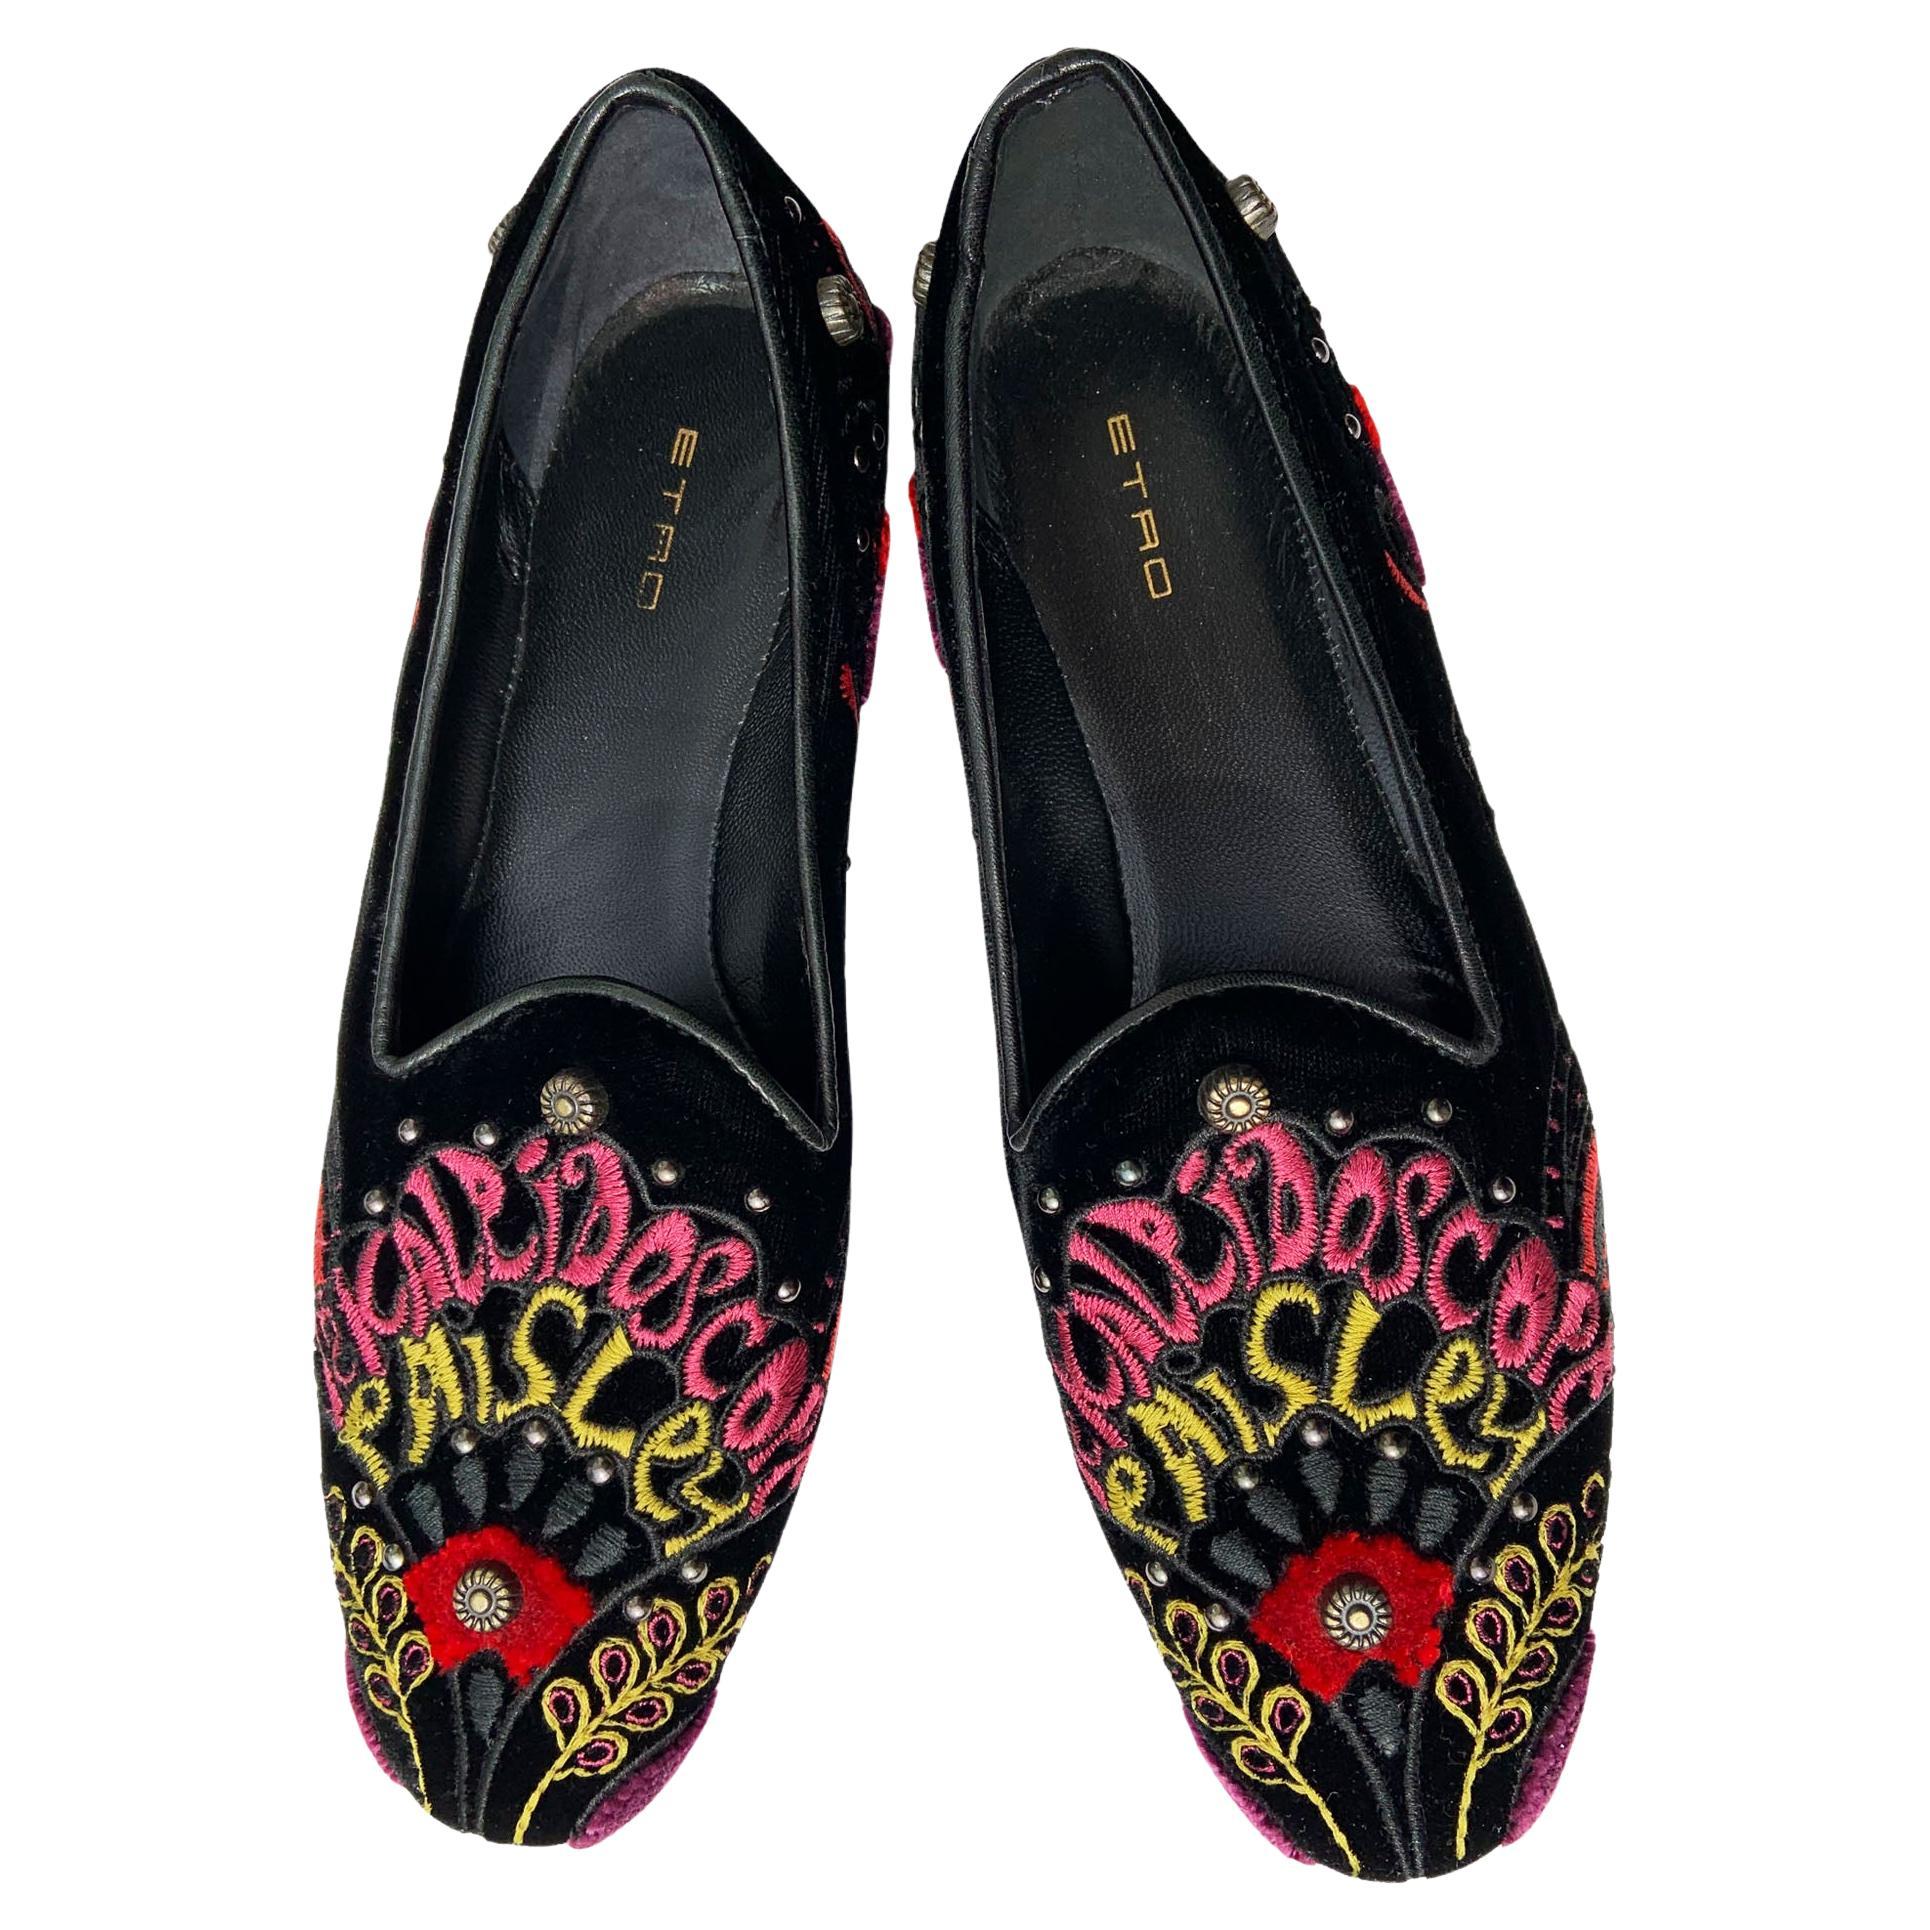 NWT Etro Black Velour Embroidered Beaded Women's Plats Loafers Italian 36 For Sale